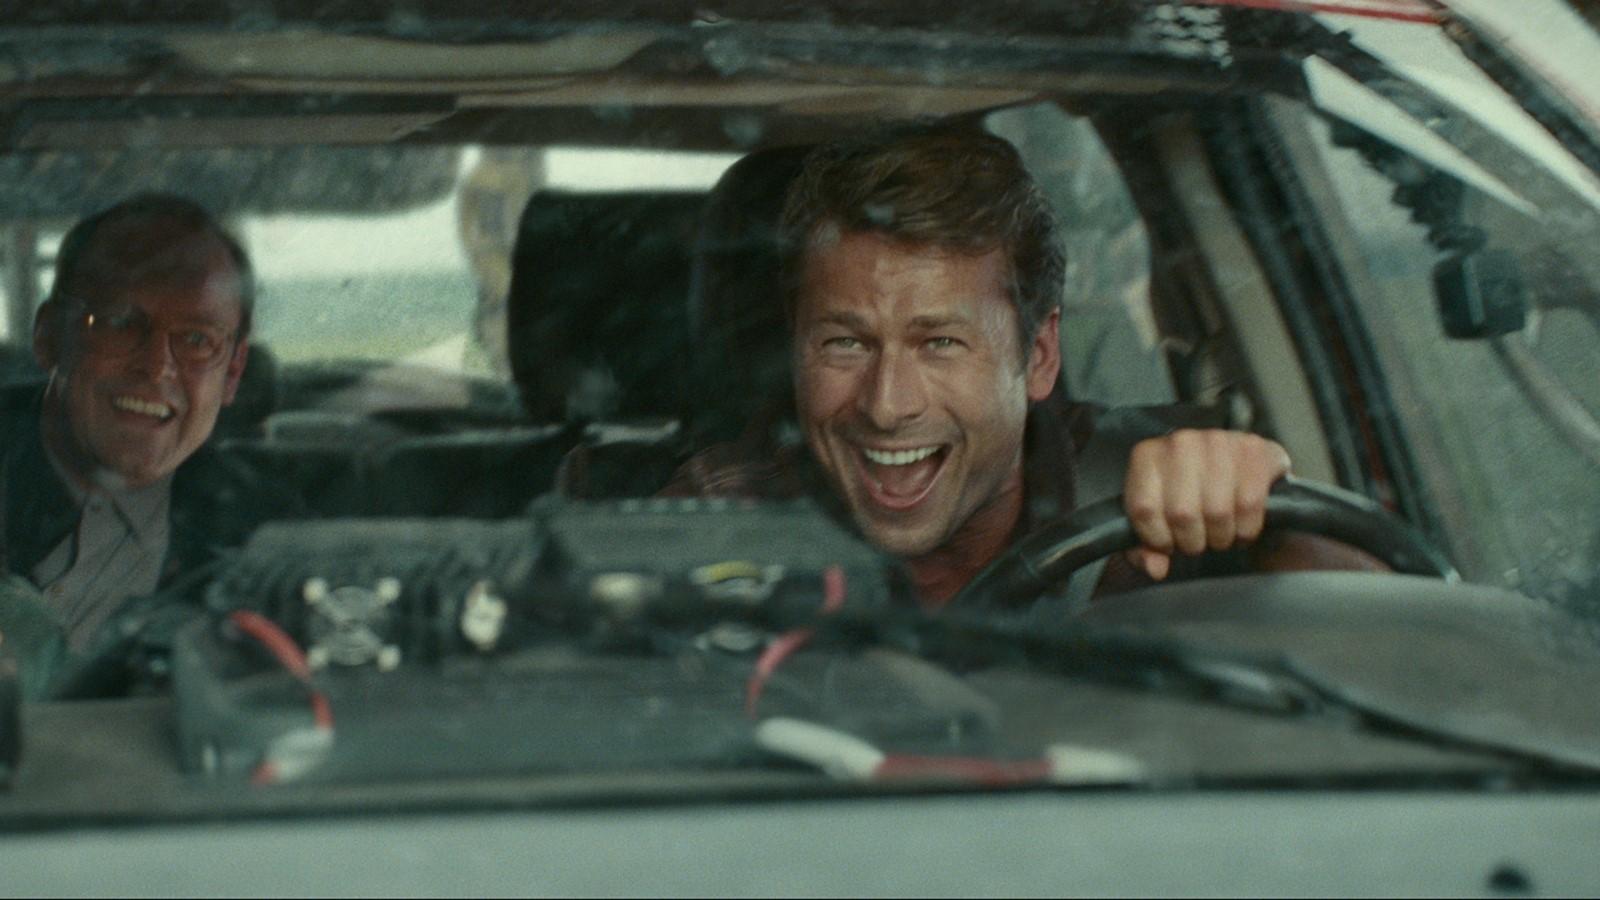 How to watch Twisters: Glen Powell sitting behind the wheel of a car and smiling